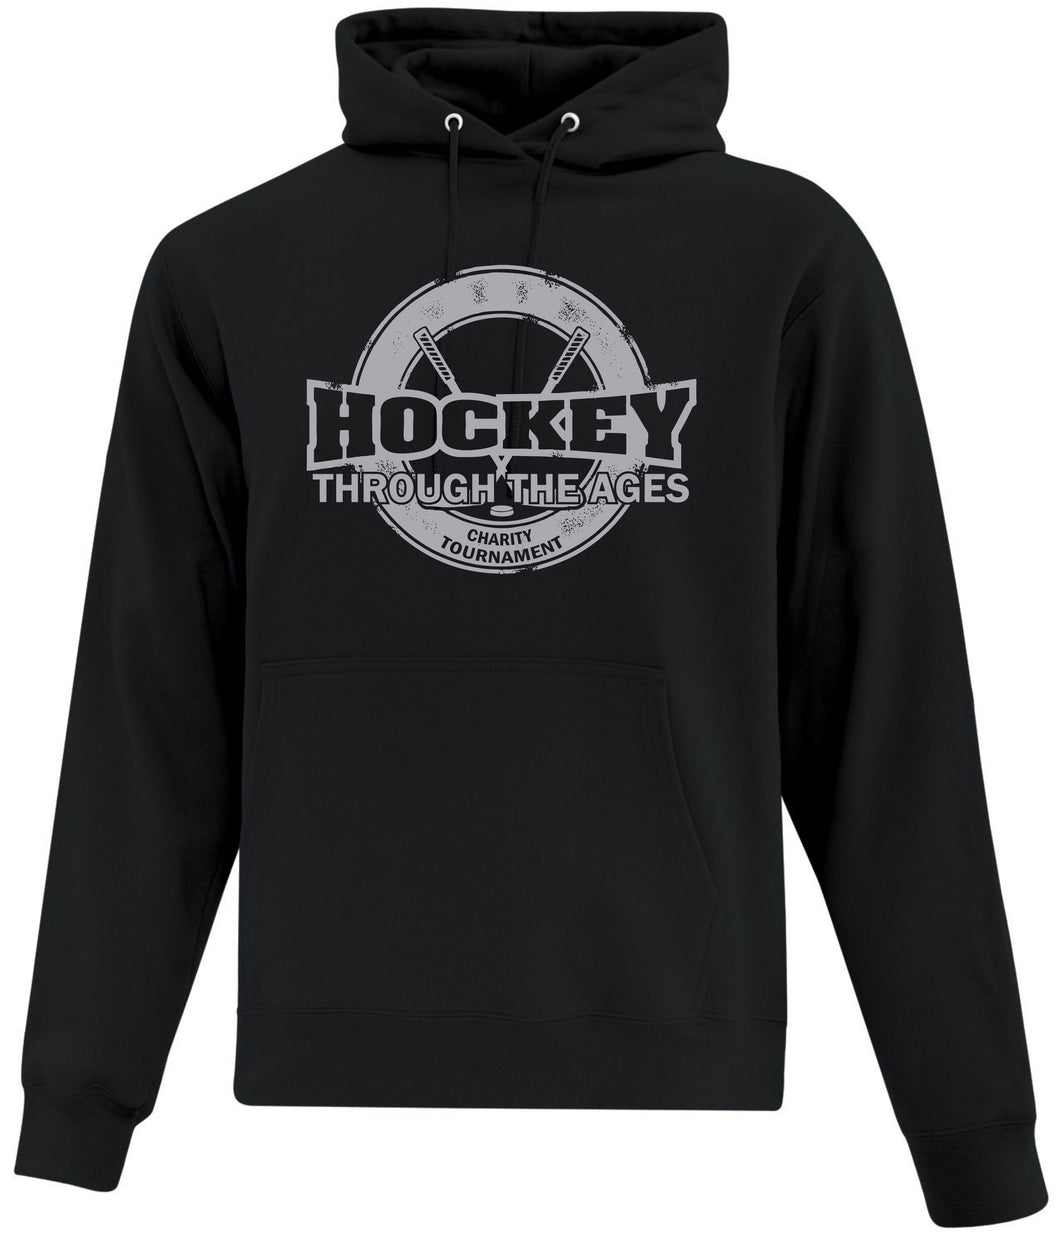 ADULT COTTON HOODIE ATCF2500 - HOCKEY THROUGH THE AGES LOGO - HP